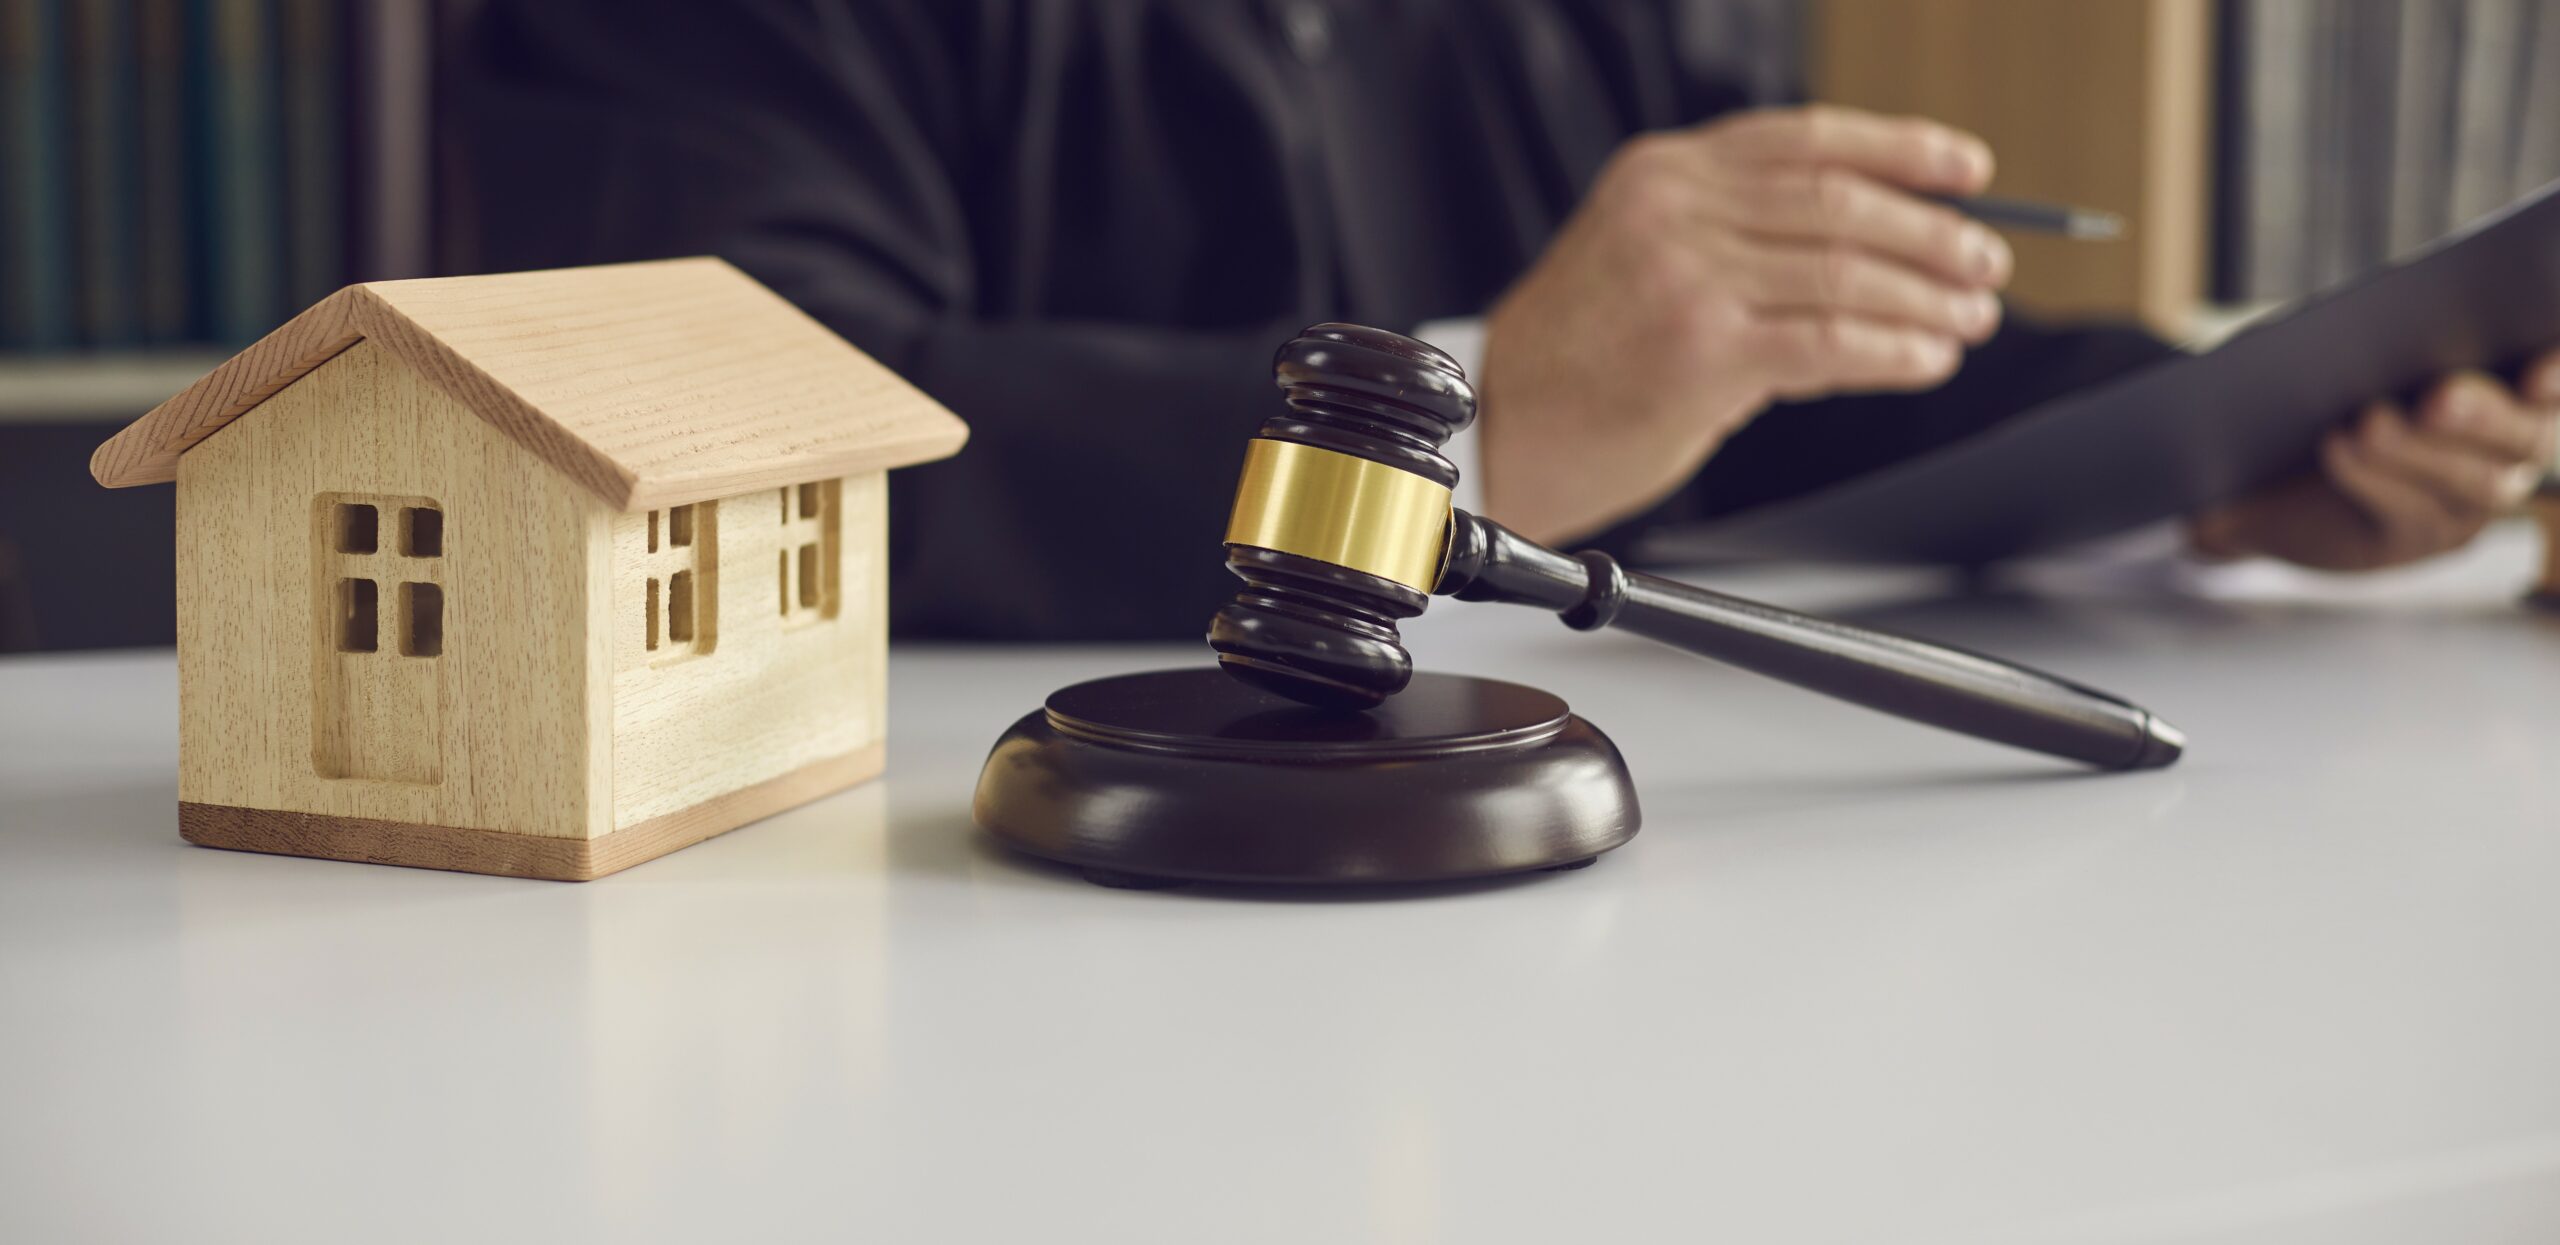 What are the legal responsibilities of executors regarding probate real estate?